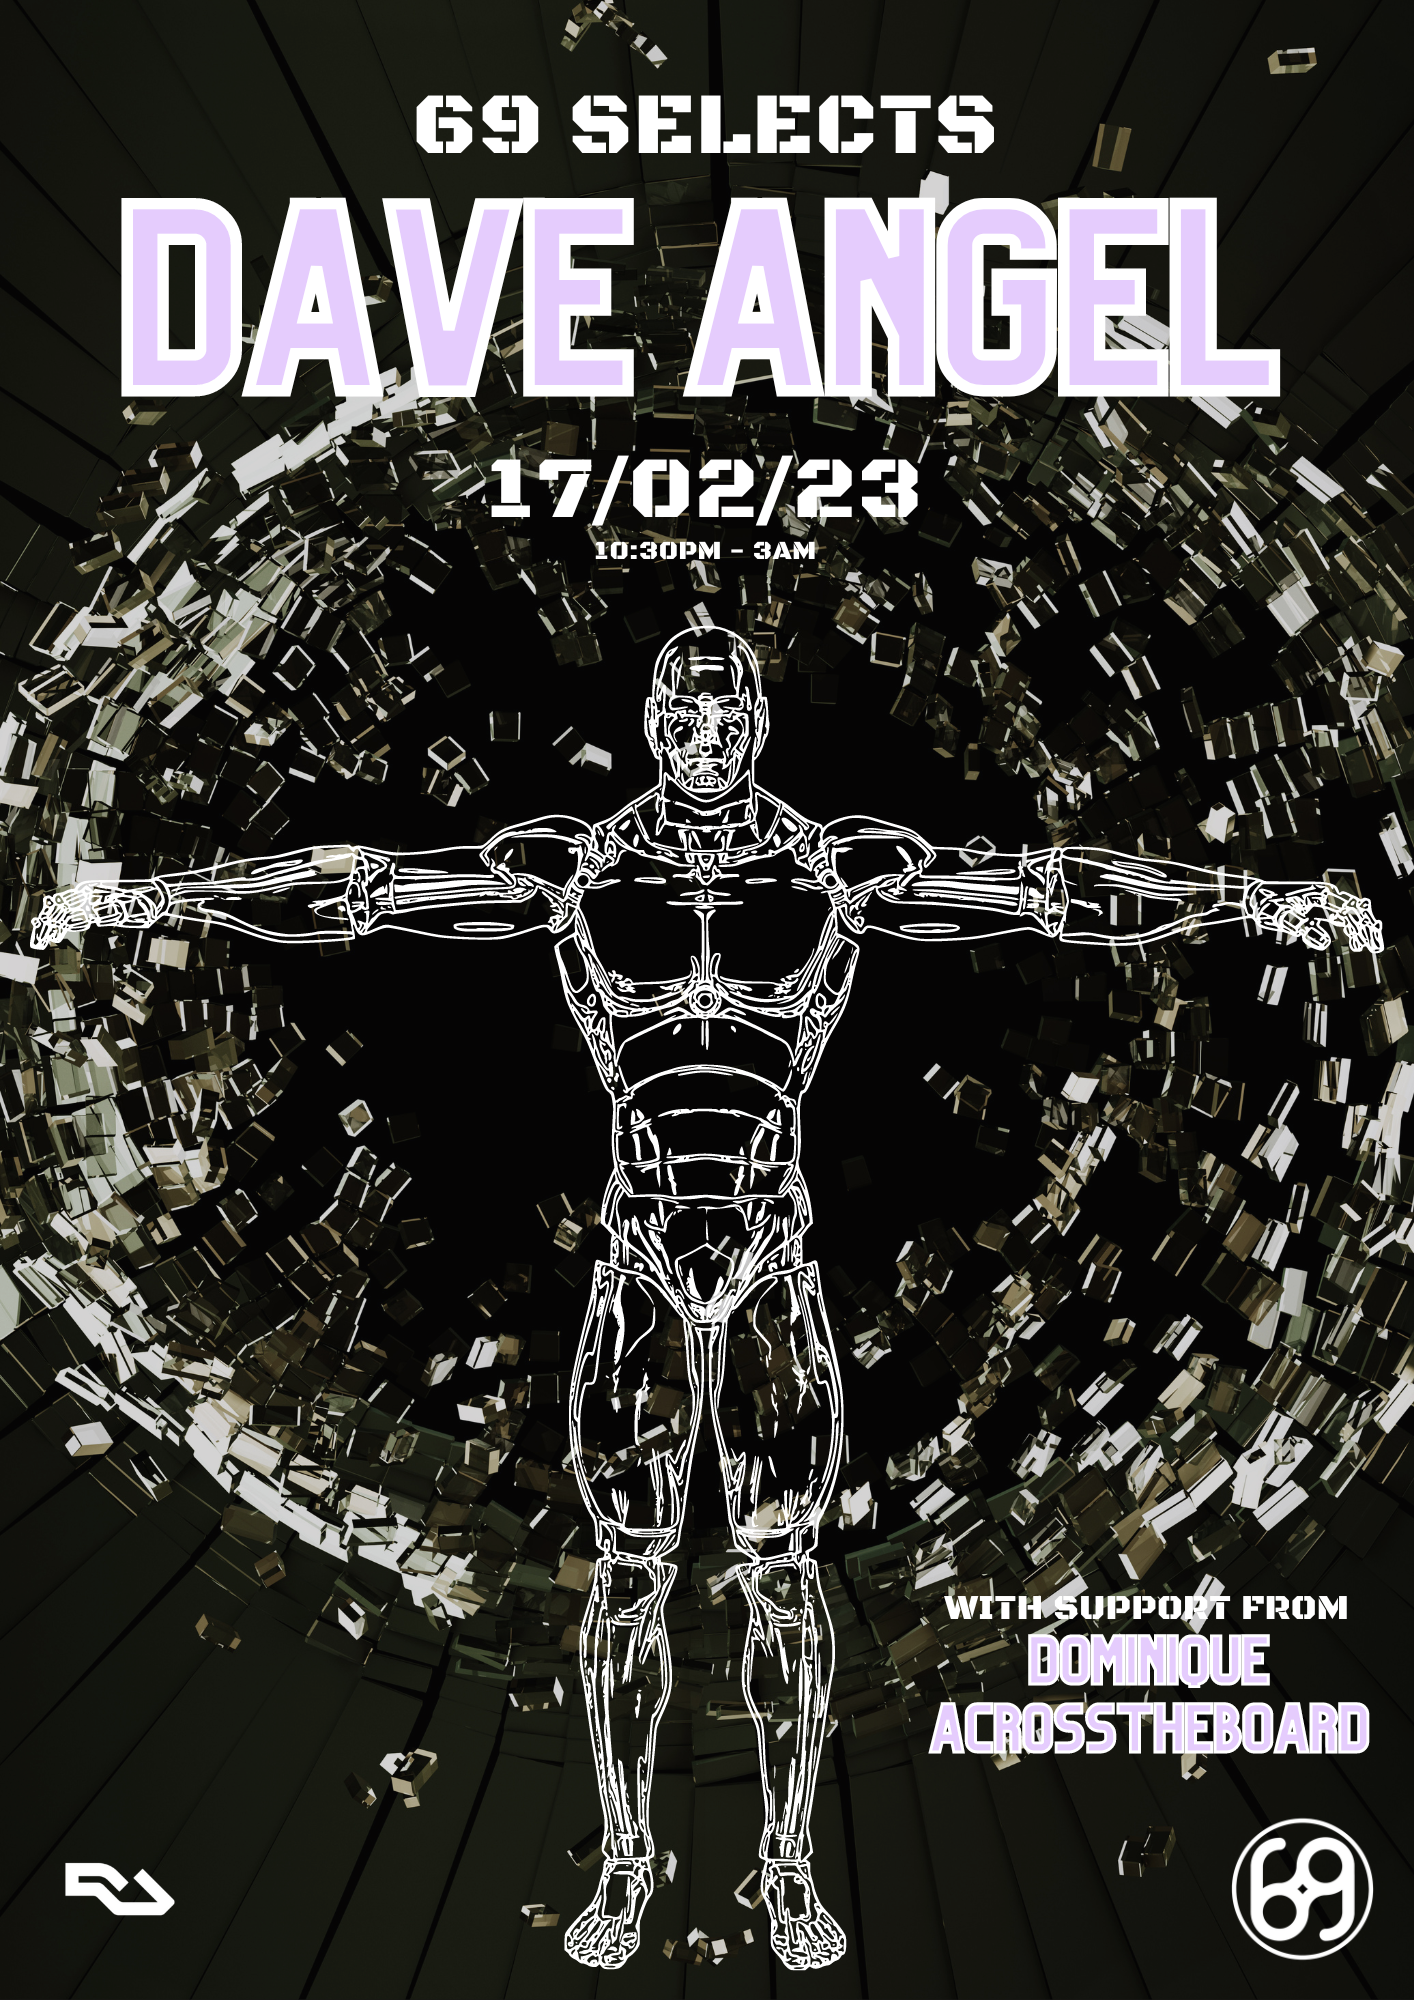 Club 69 selects: Dave Angel - フライヤー表